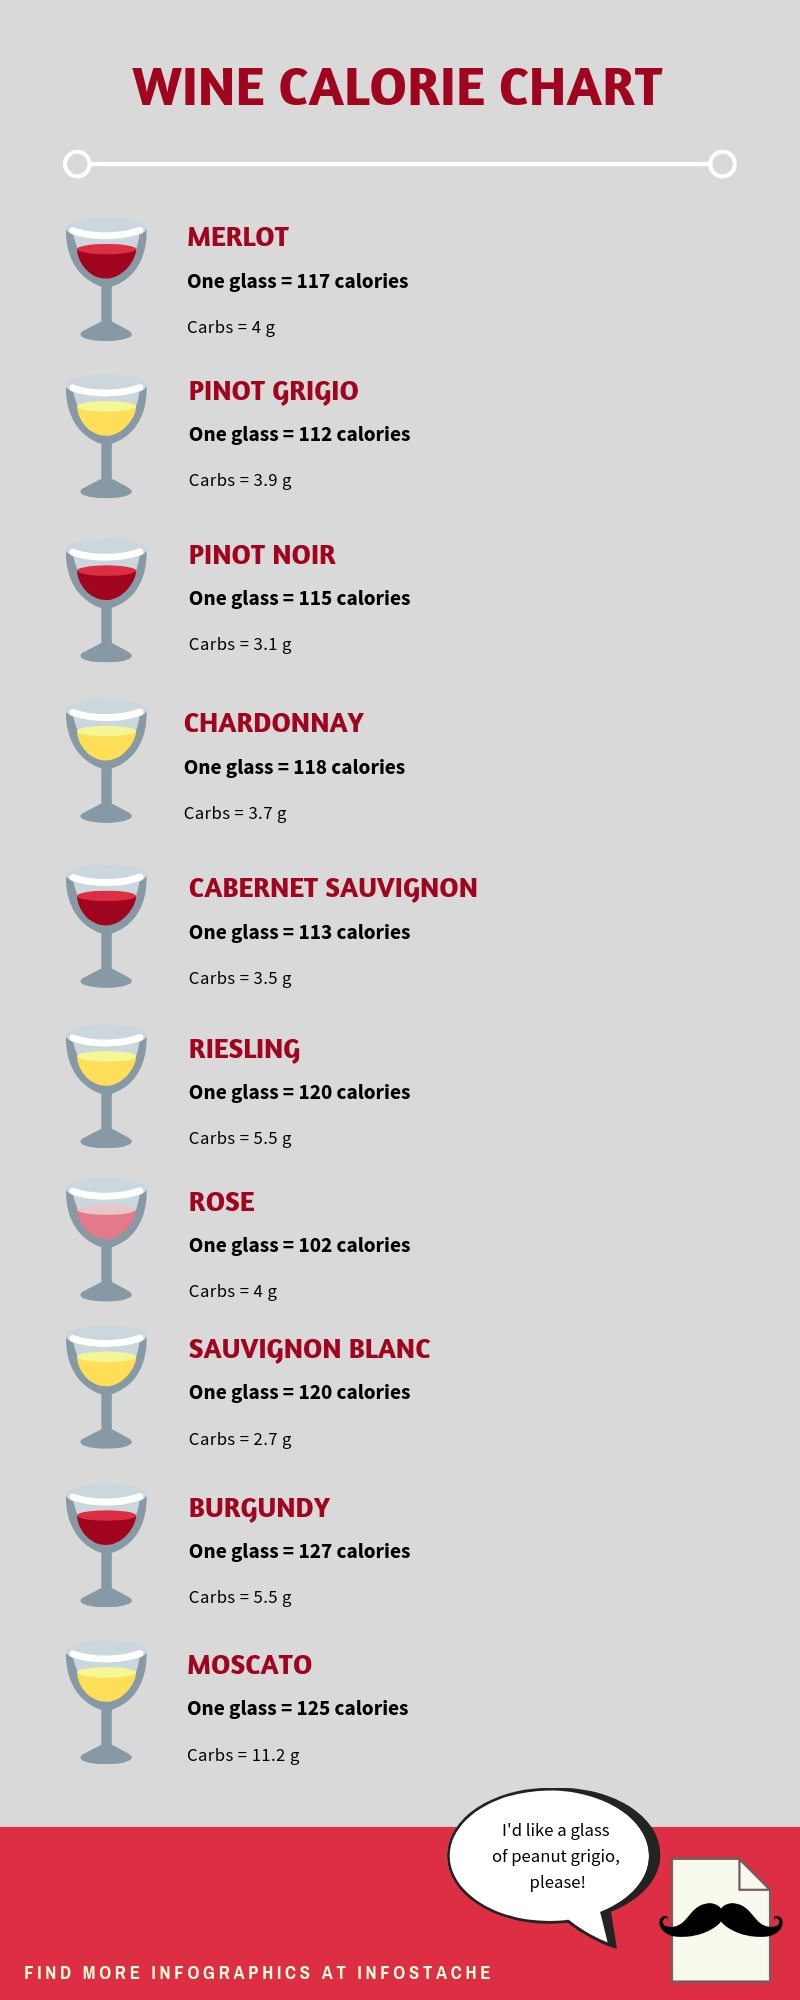 Wine Calorie Chart - Infographic